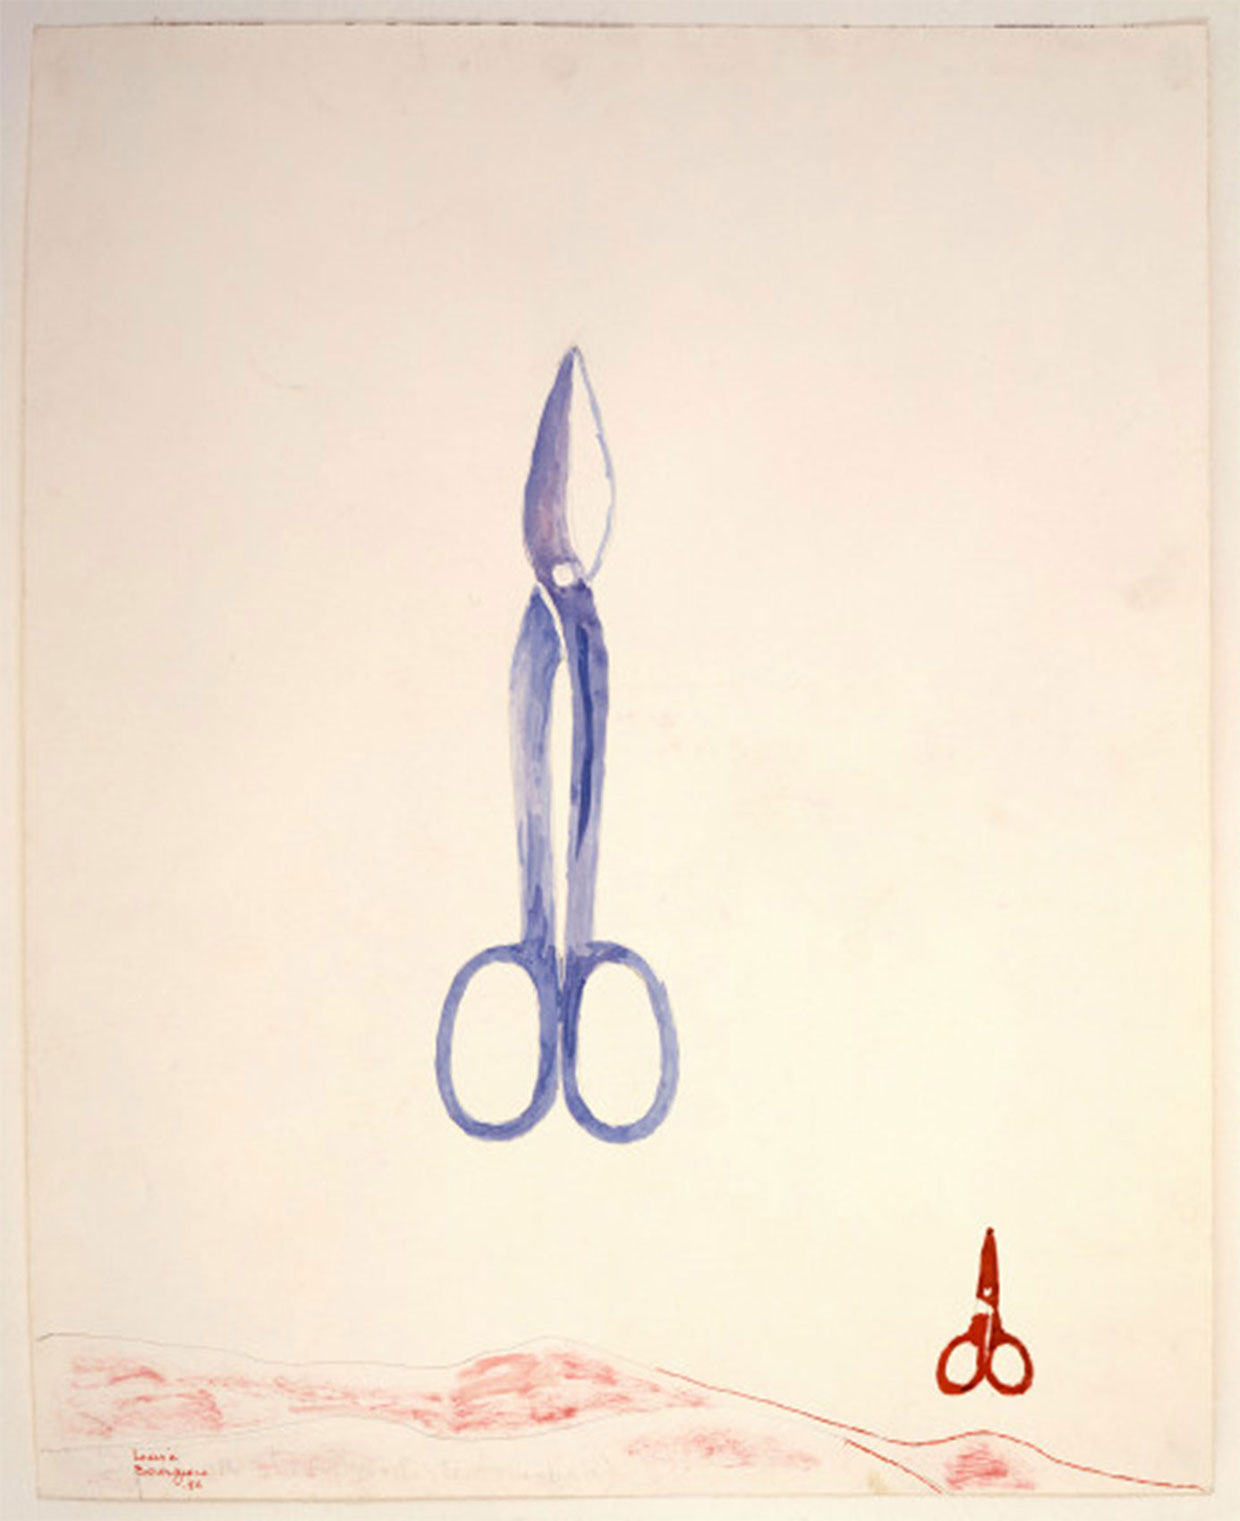 Louise Bourgeois - Self Portrait - Hauser & Wirth